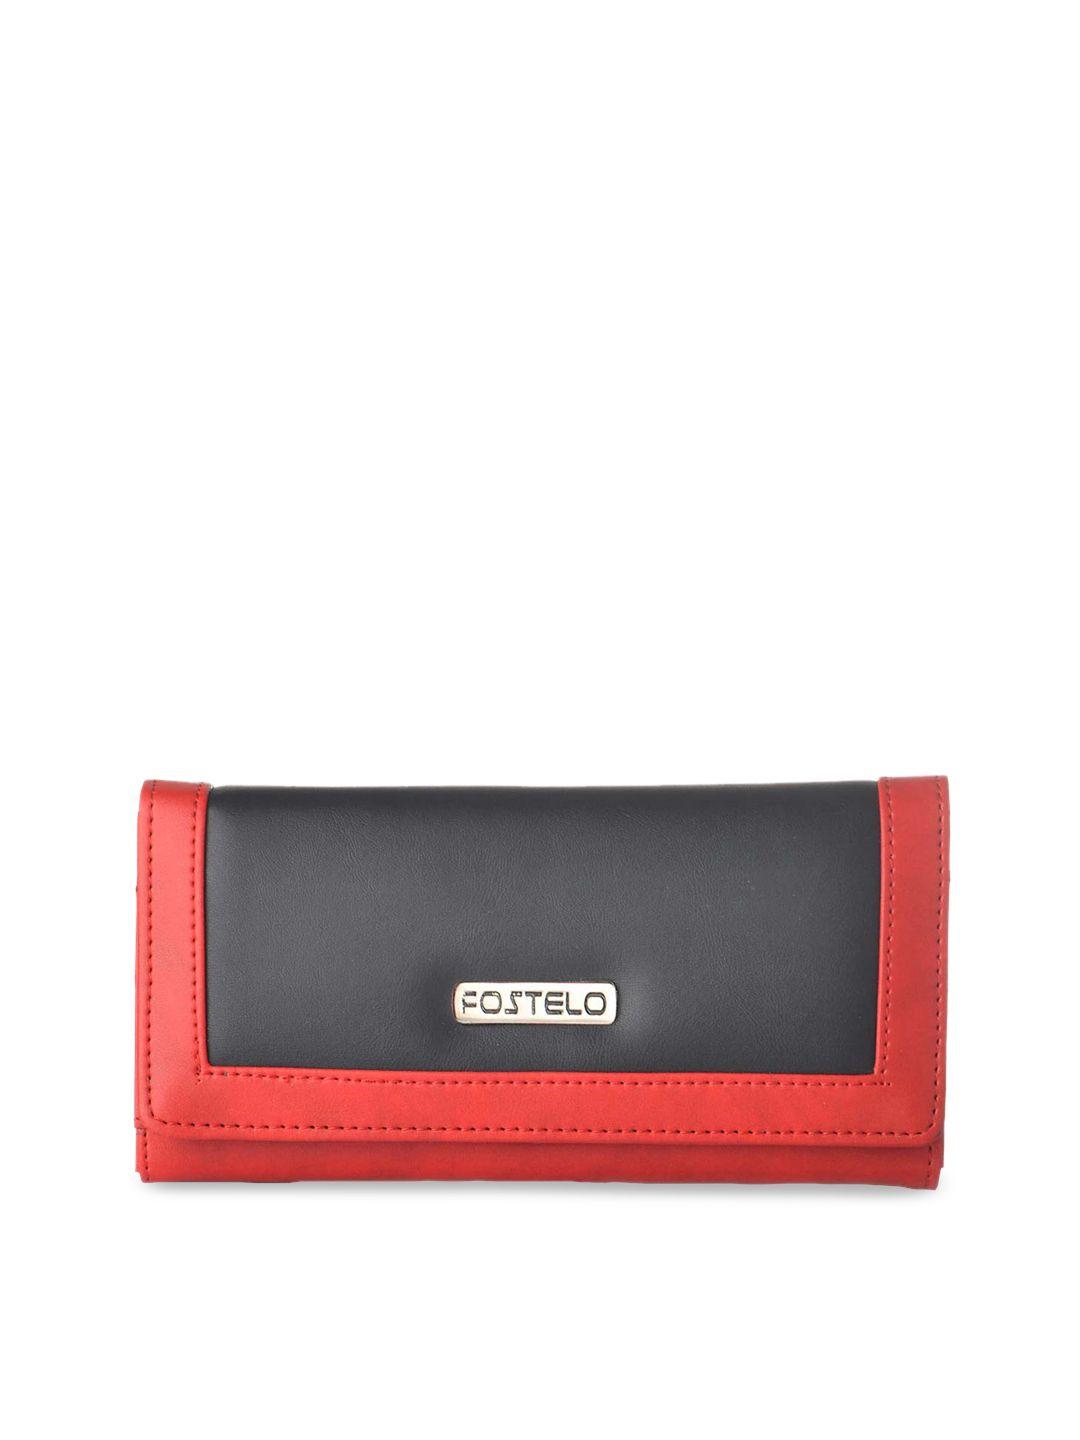 fostelo black solid foldover clutches